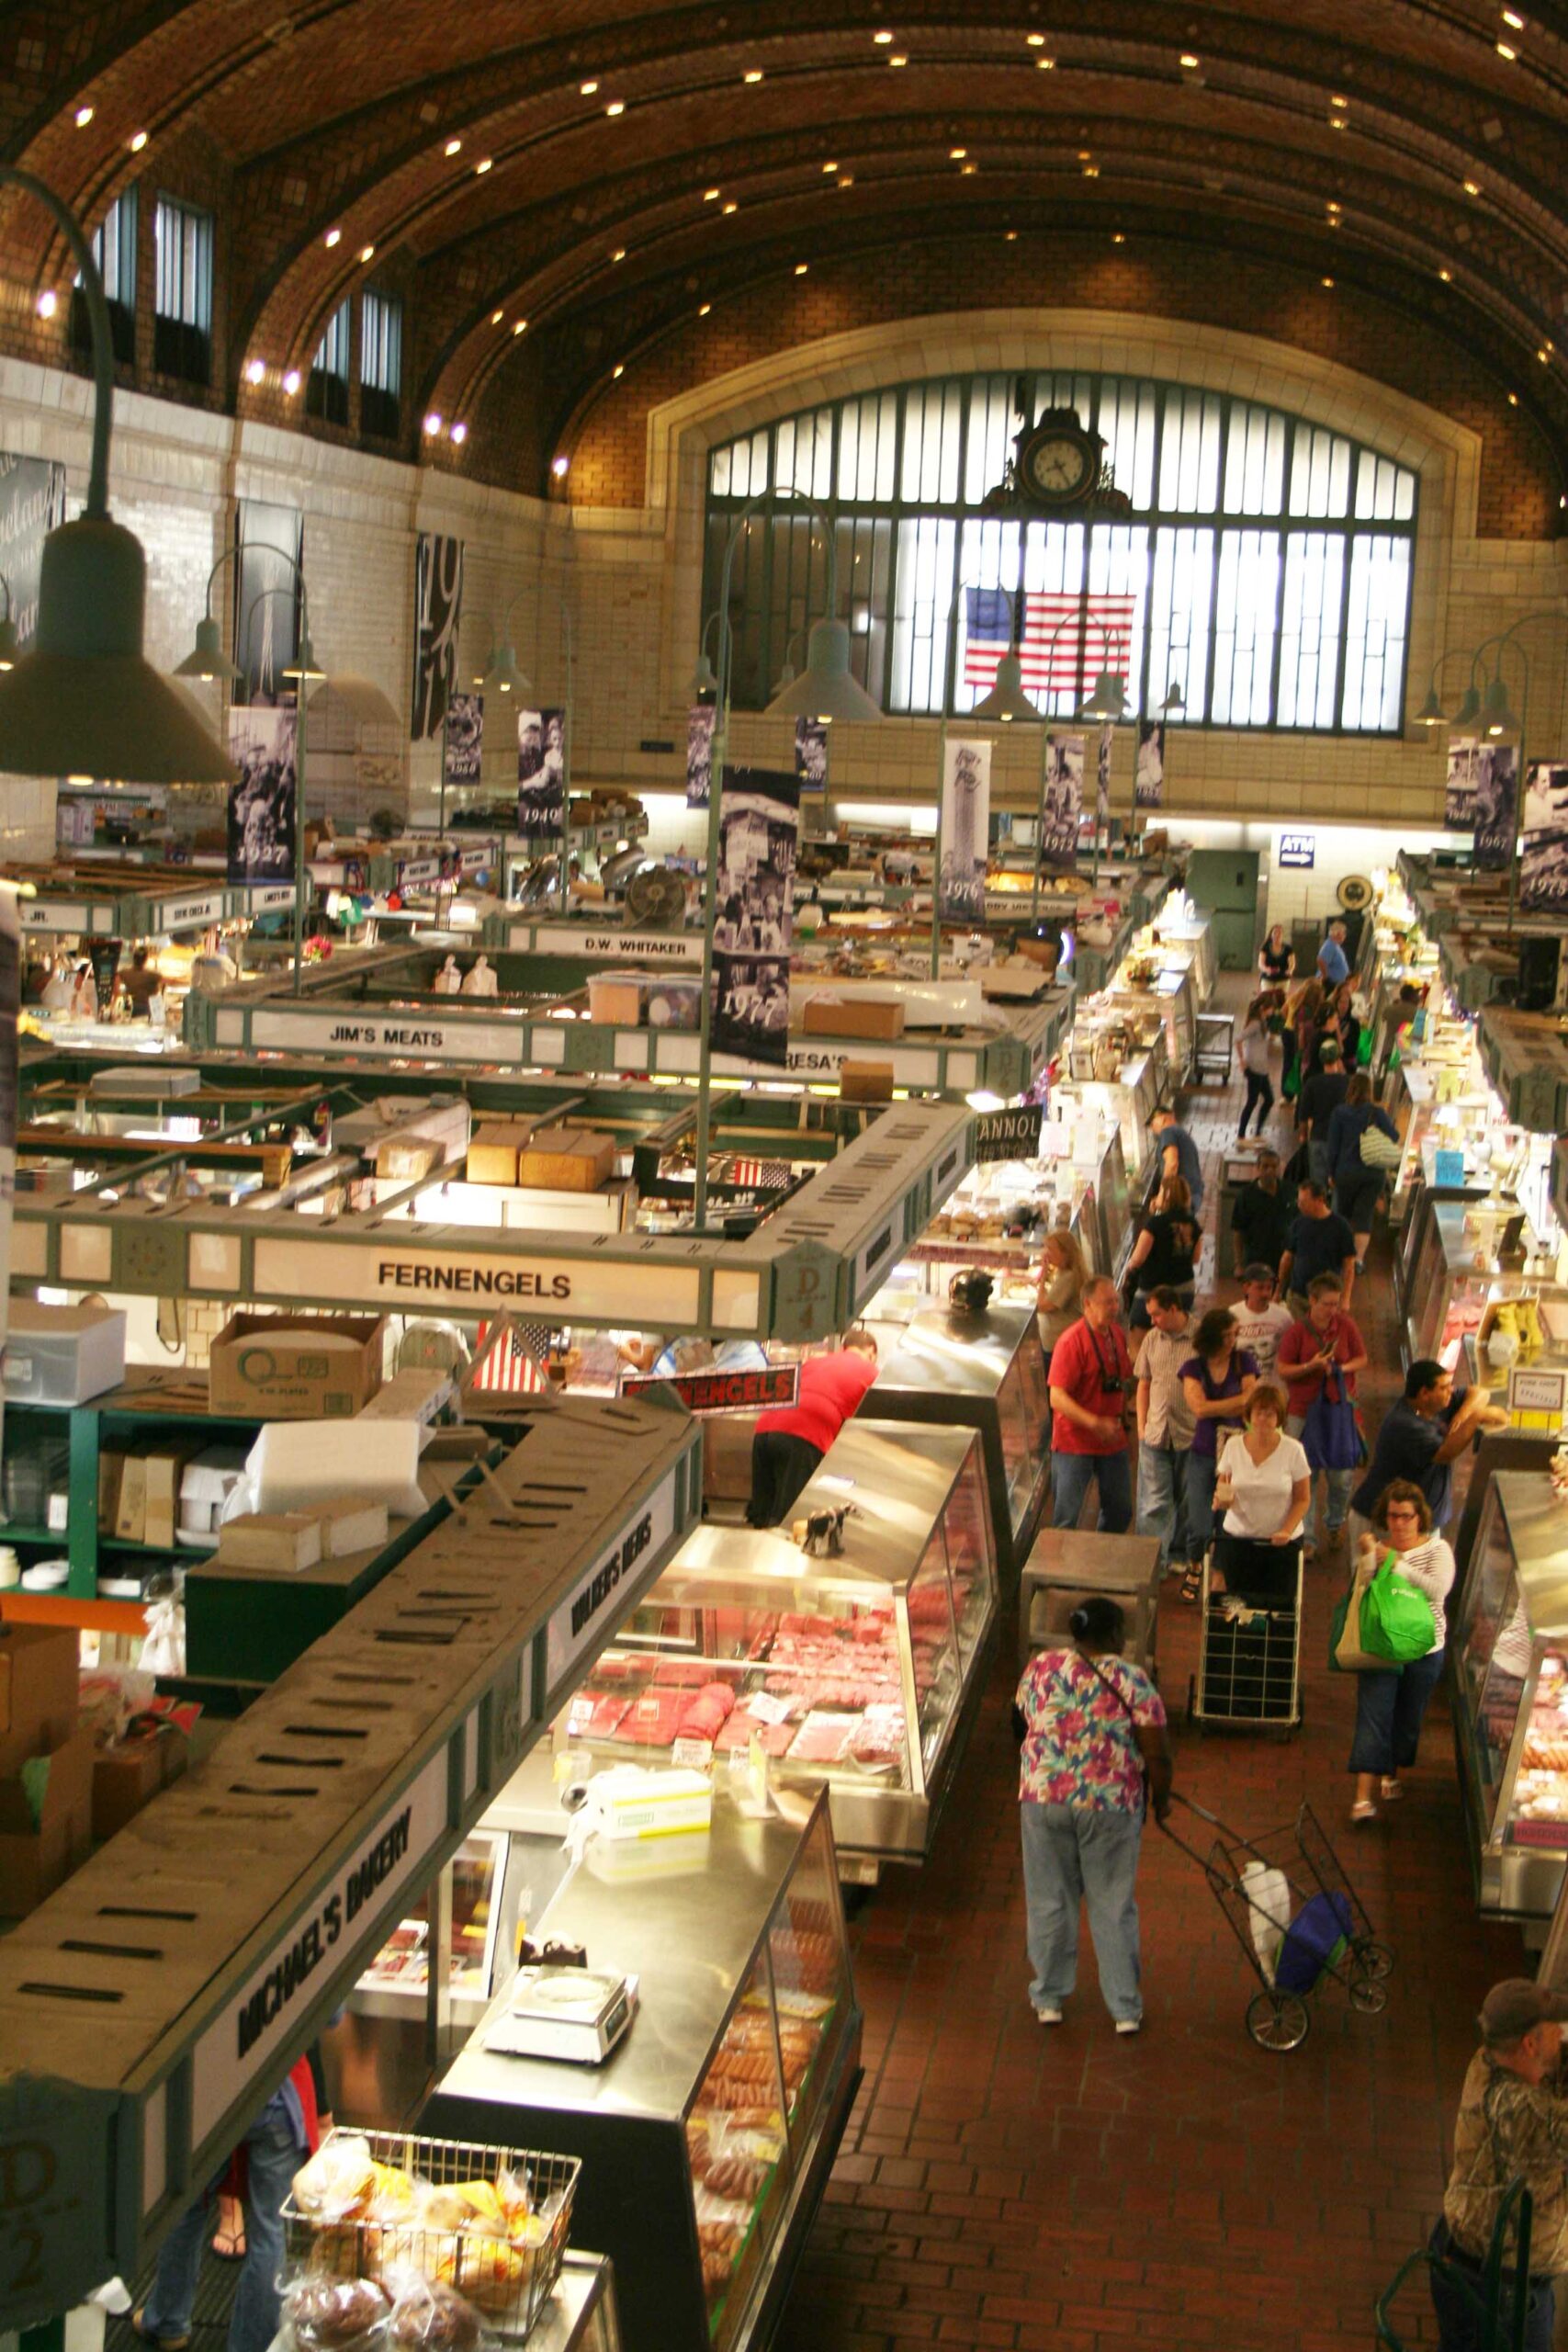 Inside the historic West Side Market in Cleveland, Ohio. (Photo: Heather Cassell)